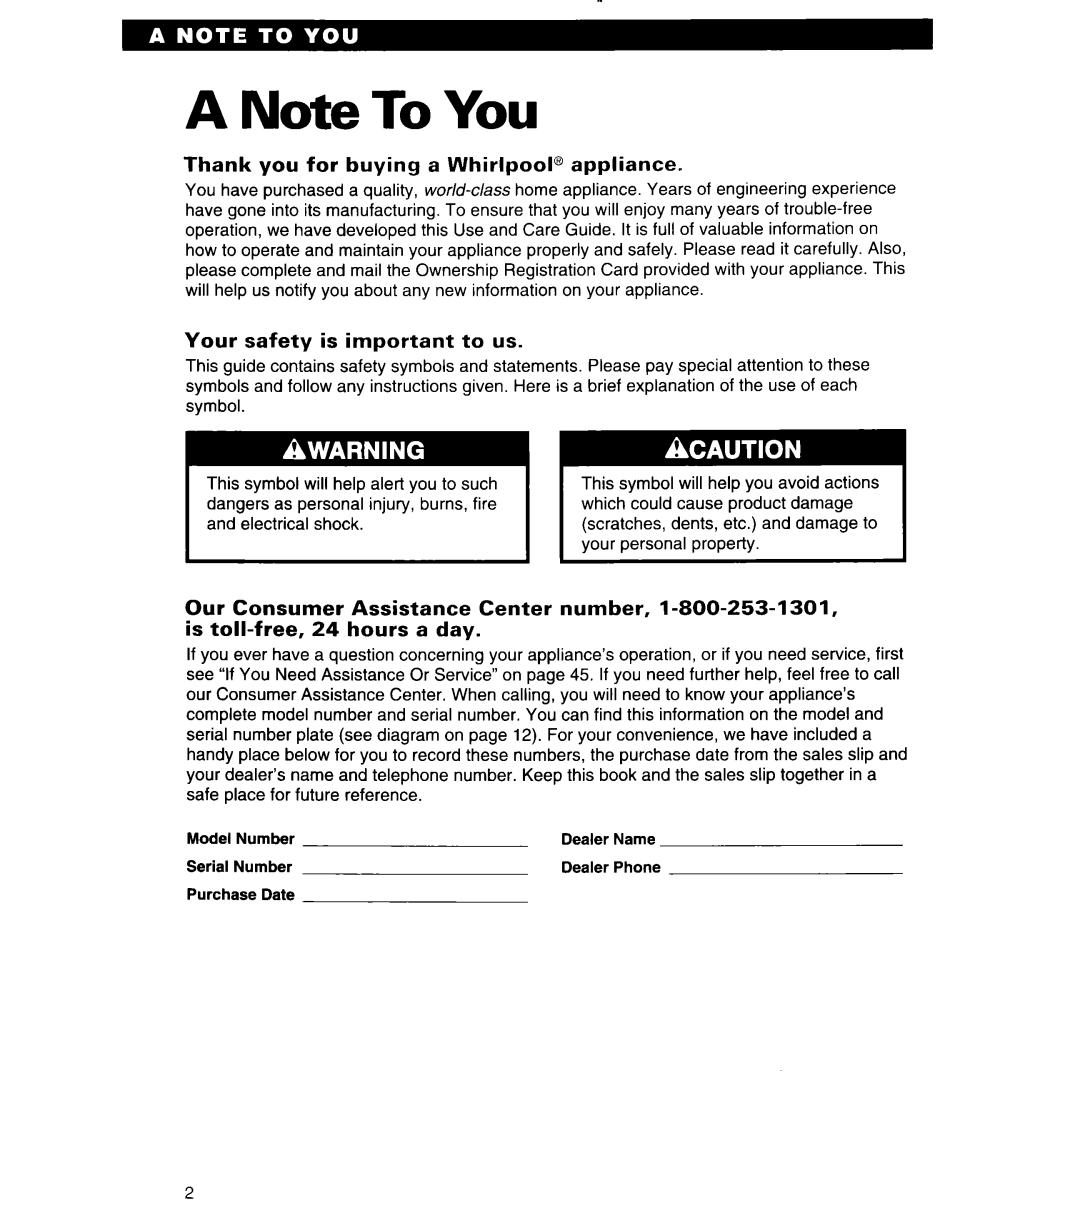 Whirlpool MT6125XBB/Q installation instructions A Note To You 